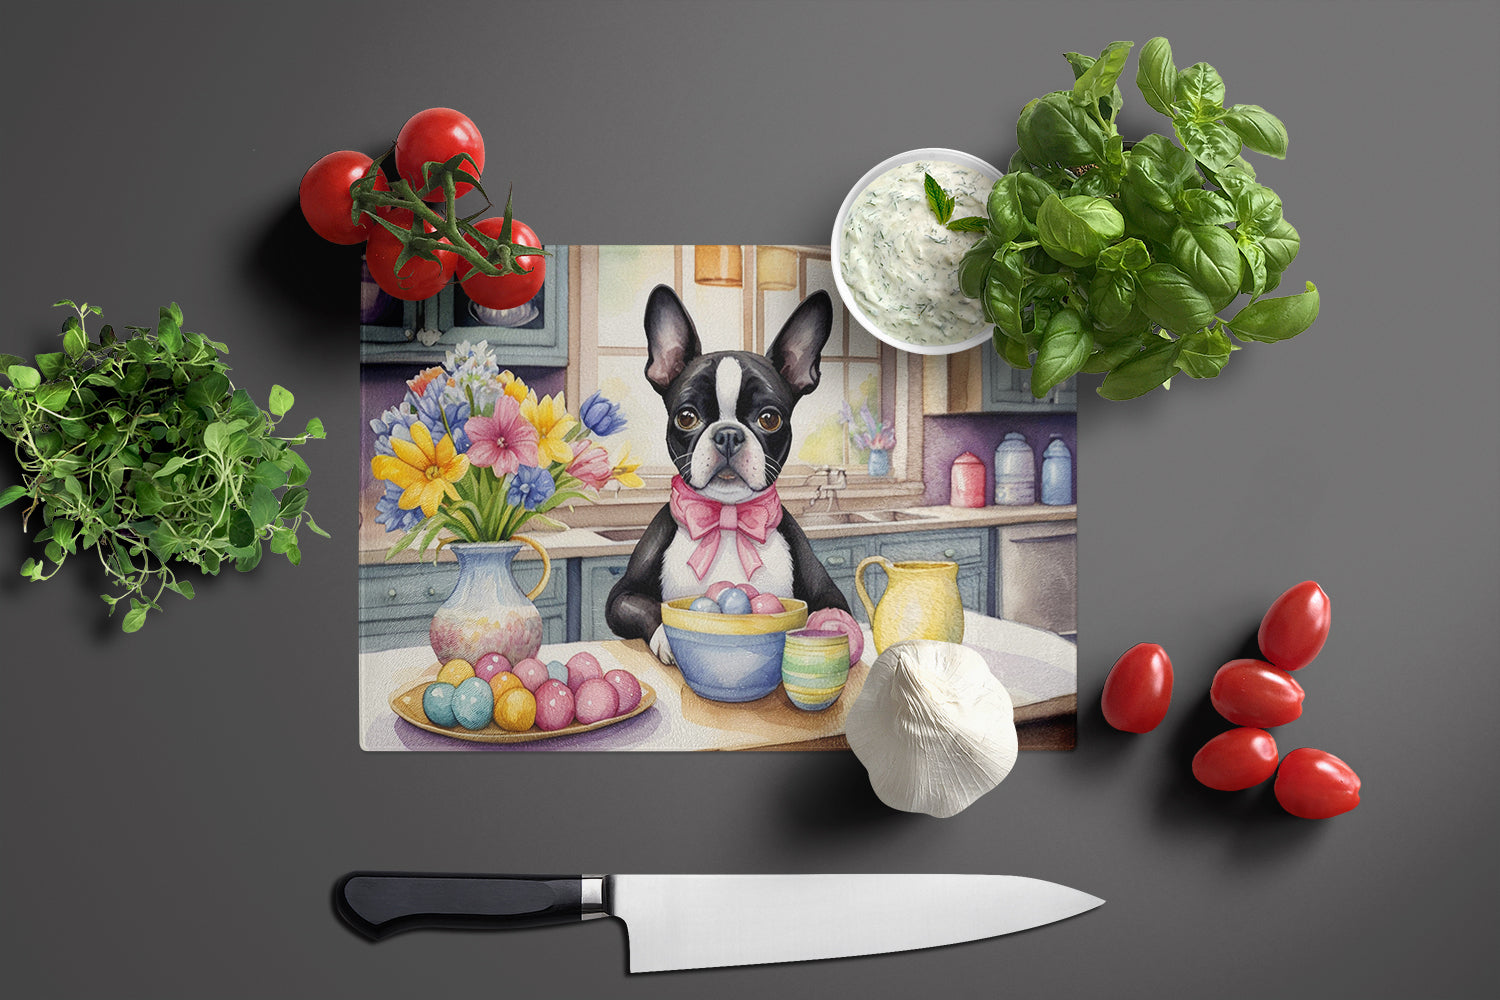 Decorating Easter Boston Terrier Glass Cutting Board